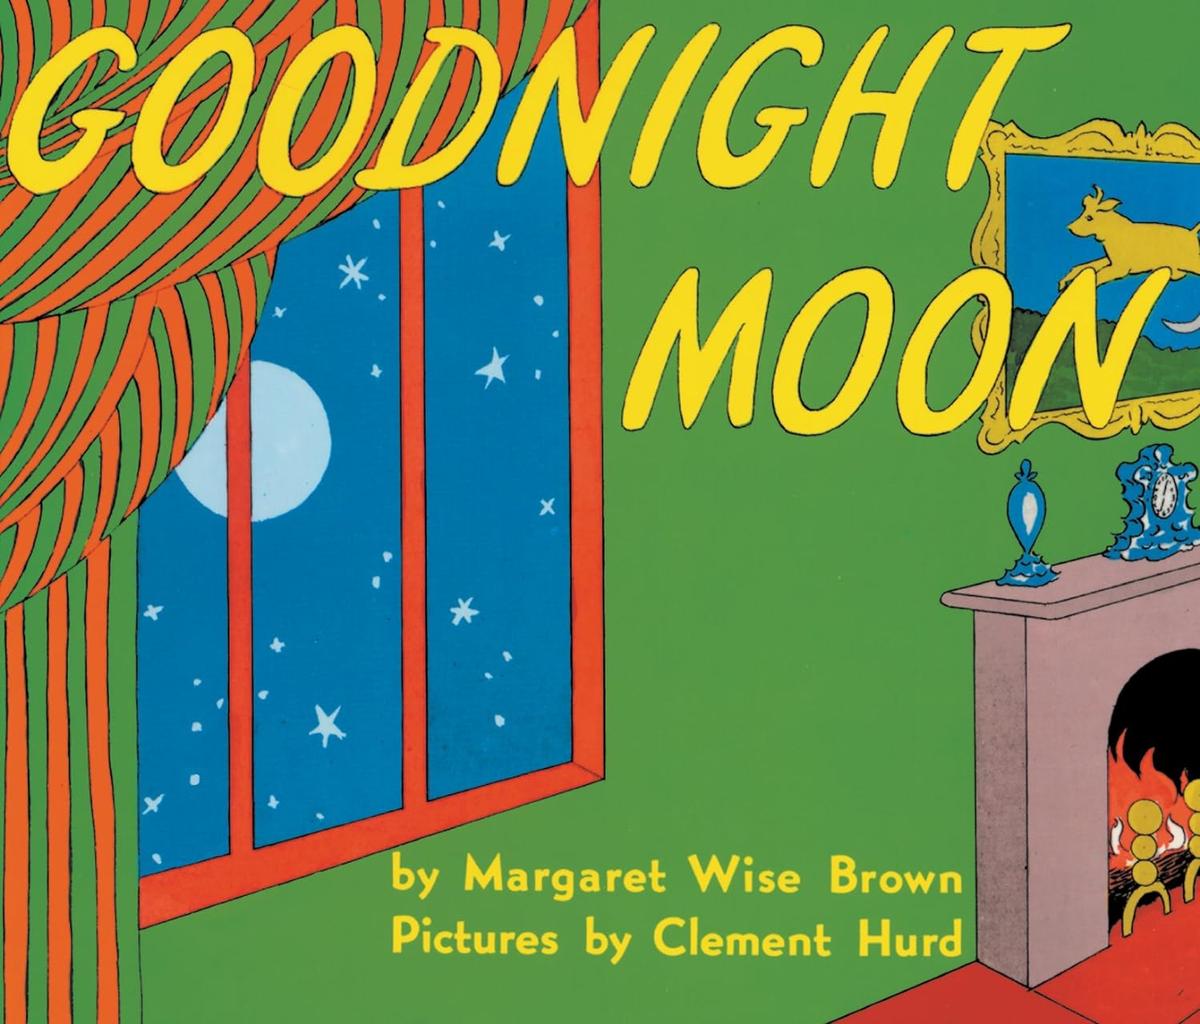 "Goodnight Moon" by Margaret Wise Brown.